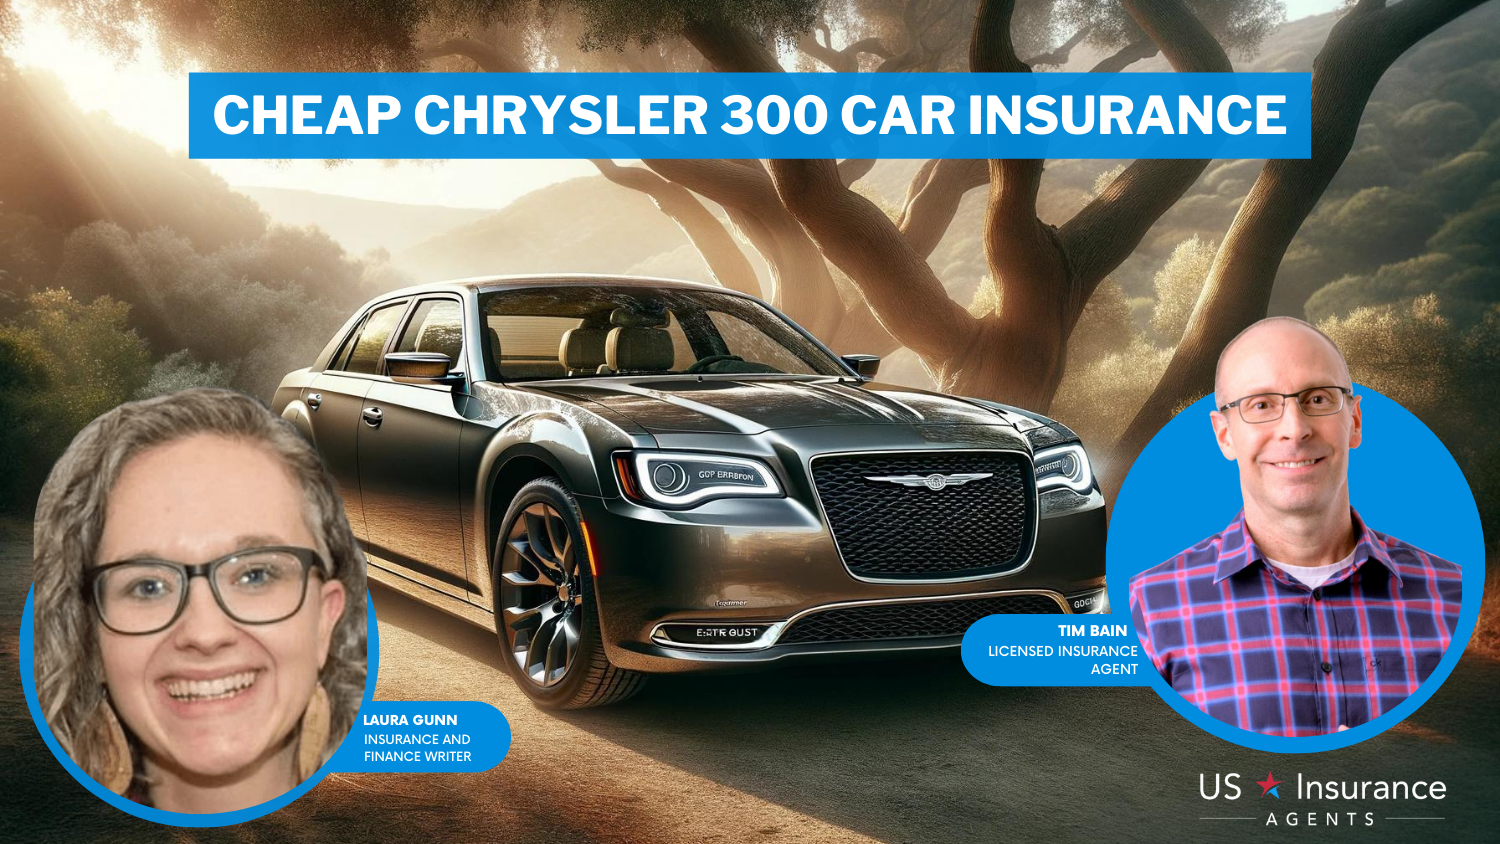 Cheap Chrysler 300 Car Insurance: Nationwide, USAA and Allstate